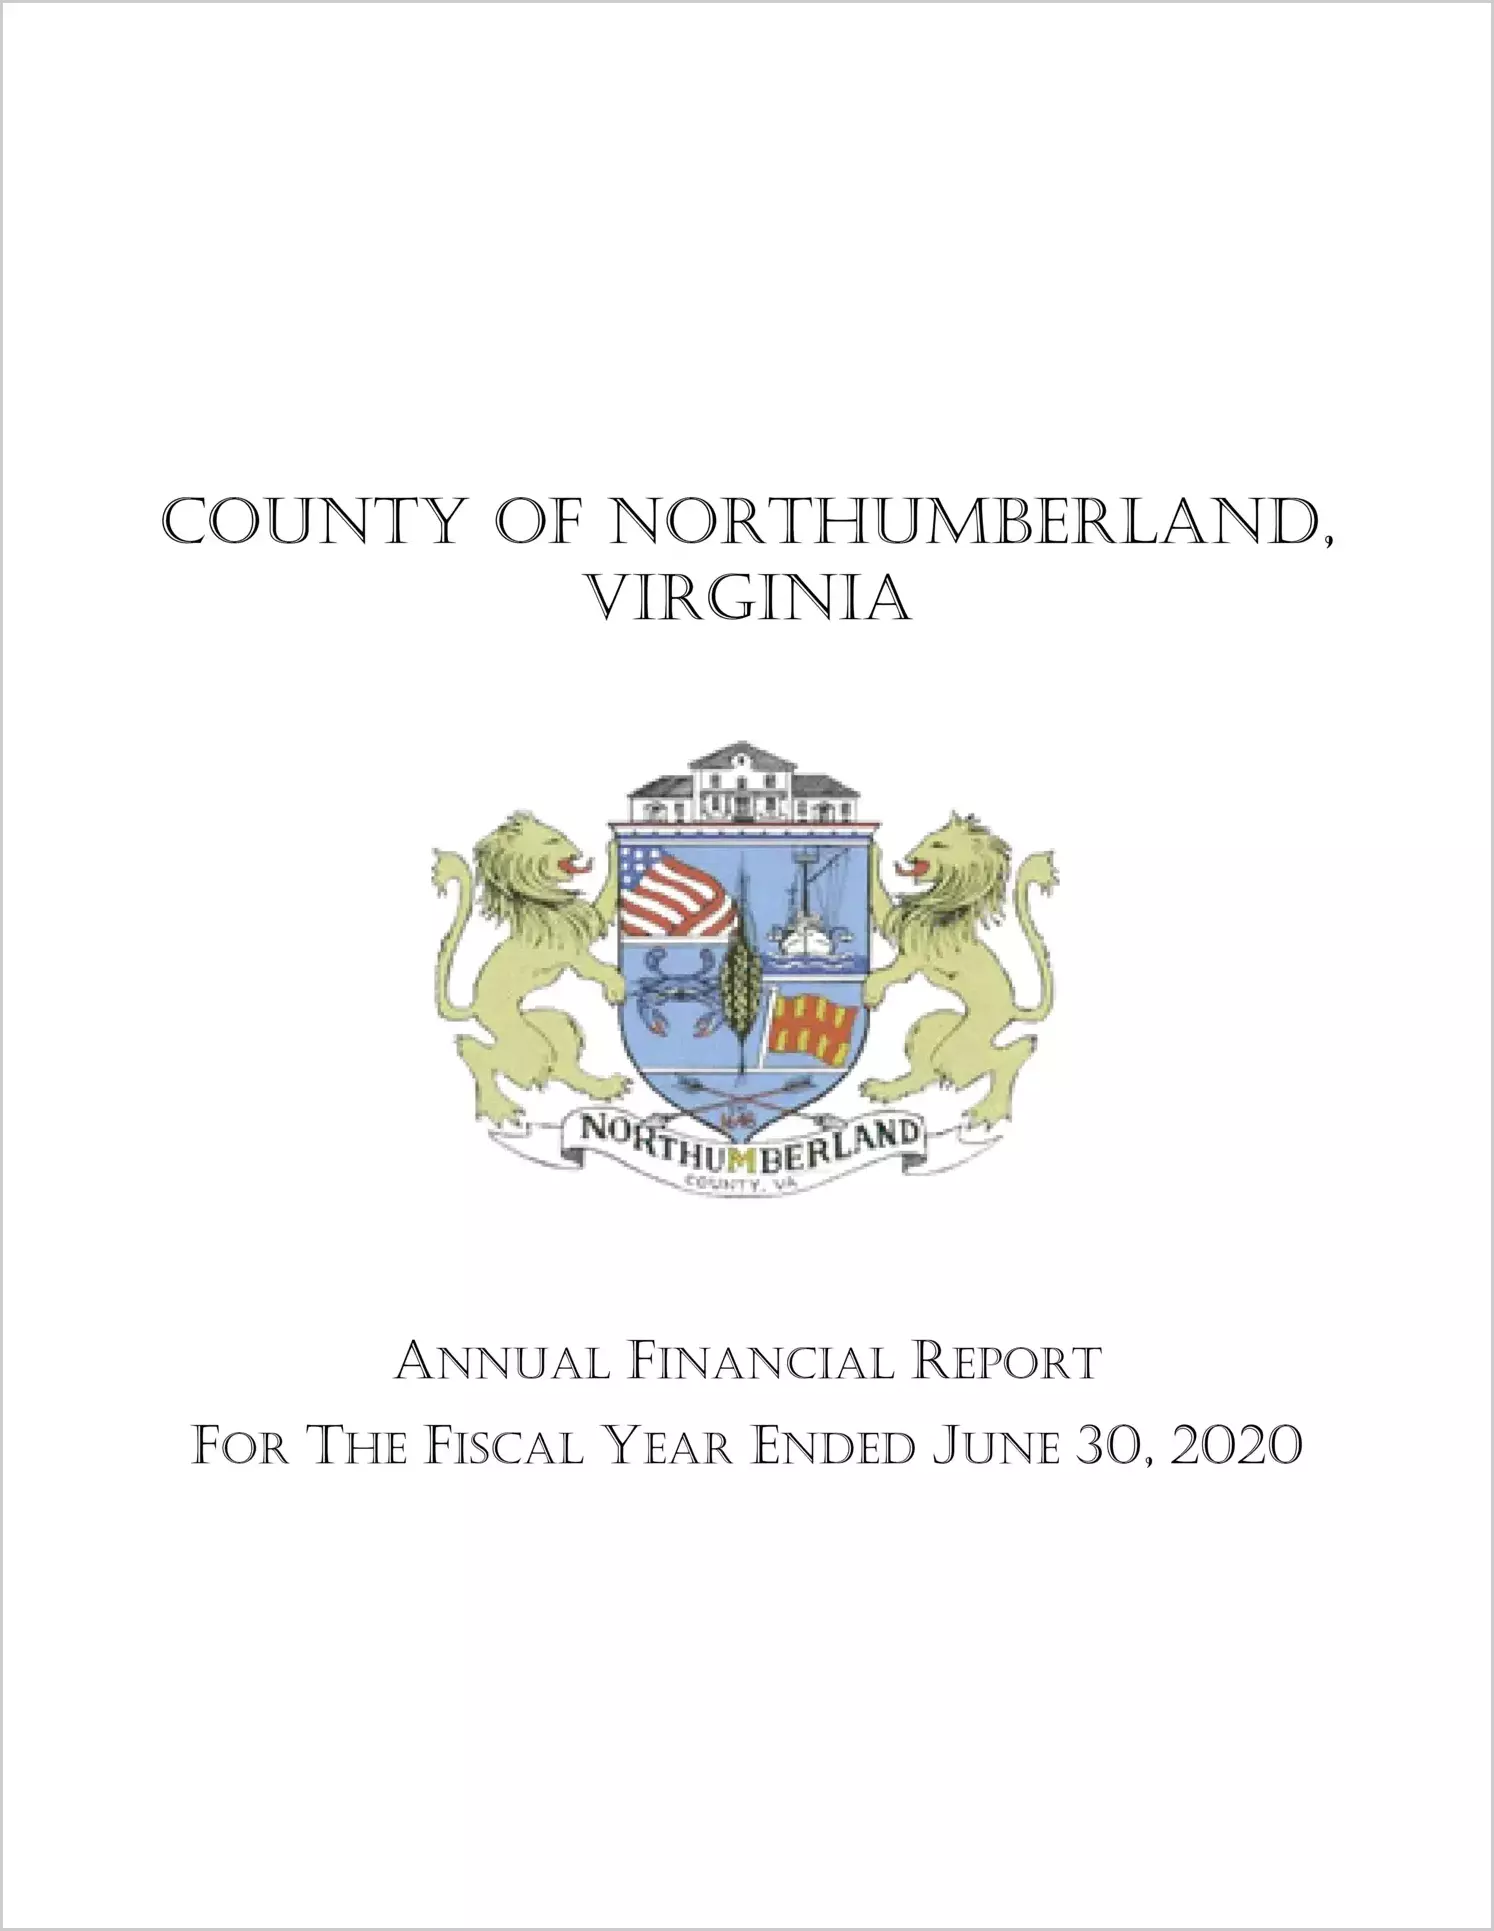 2020 Annual Financial Report for County of Northumberland